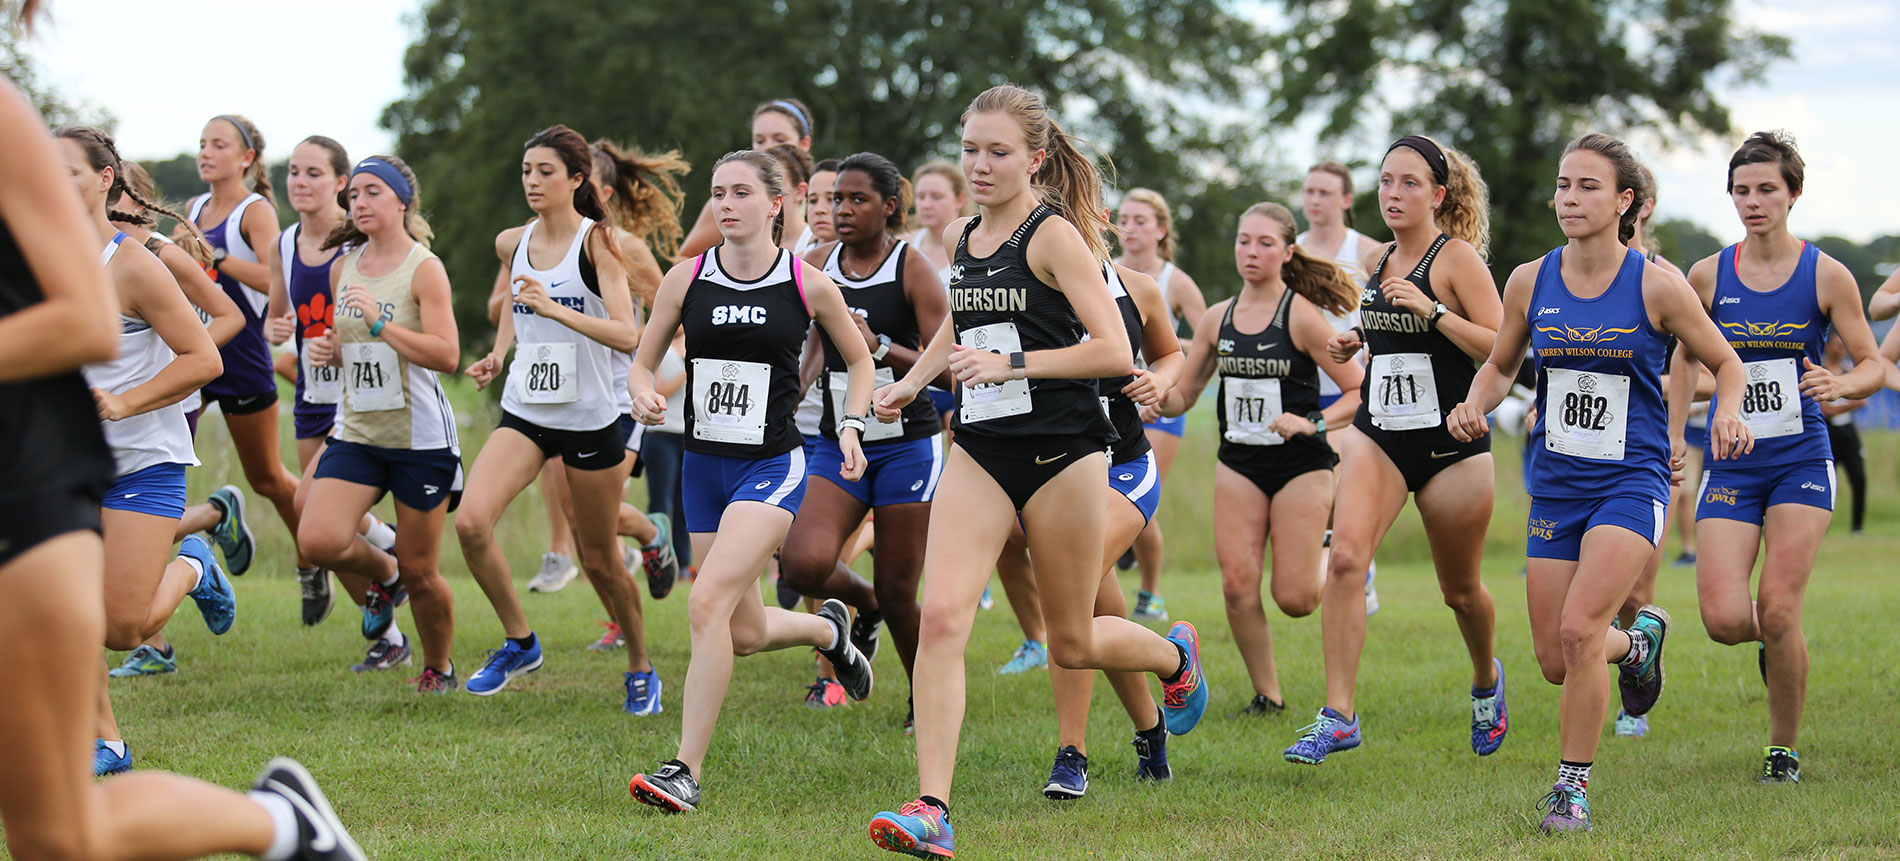 Women’s Cross Country Ranked Fourth in USTFCCCA Regional Poll